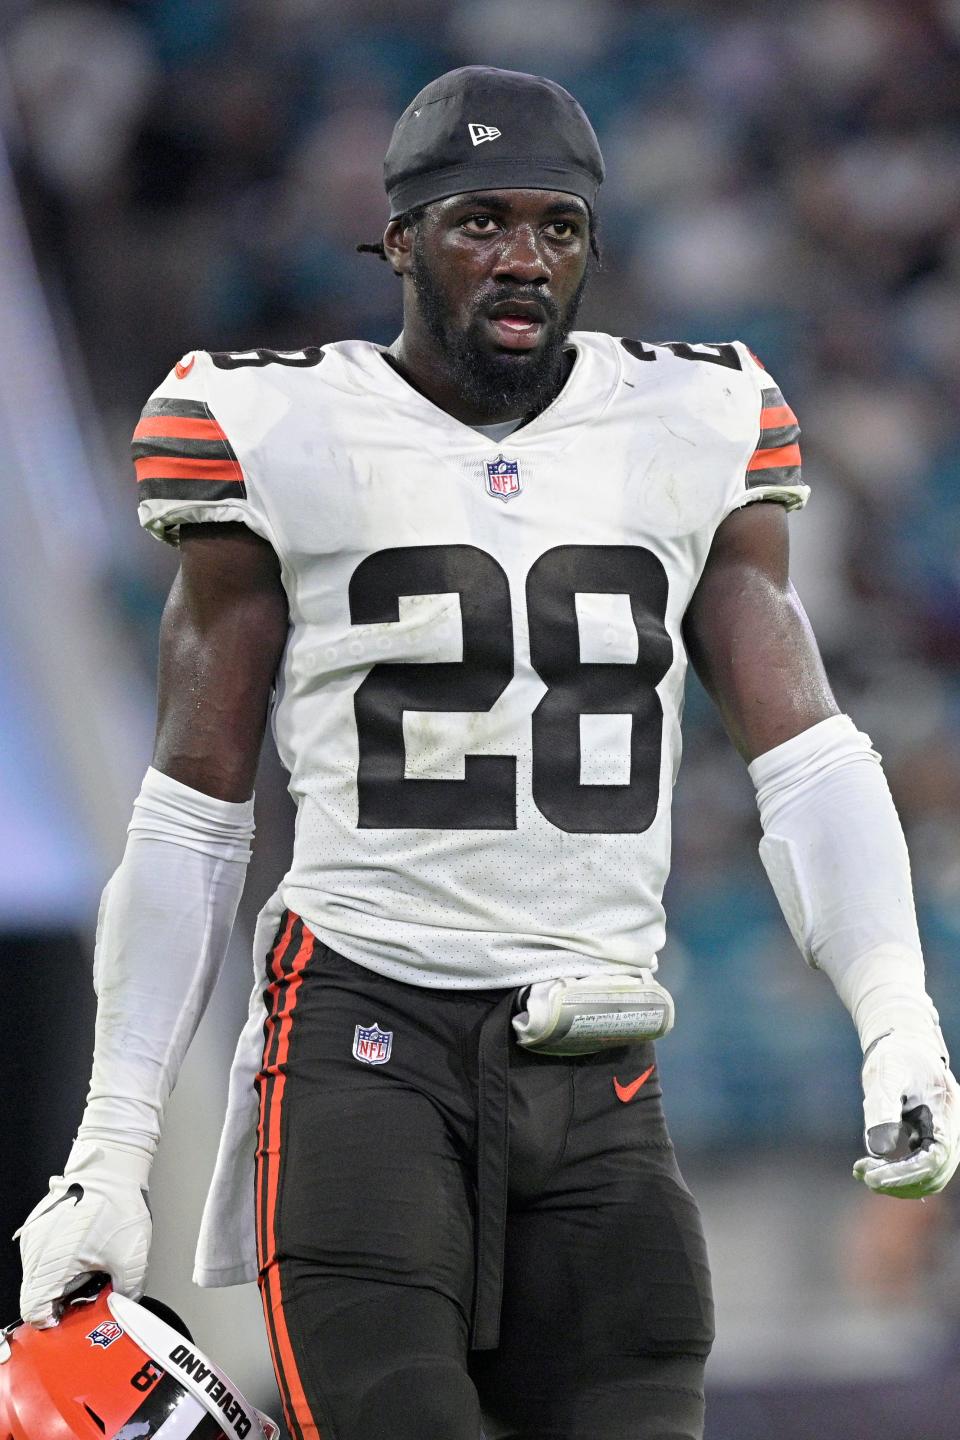 Cleveland Browns linebacker Jeremiah Owusu-Koramoah (28) walks onto the field during the second half of an NFL preseason football game against the Jacksonville Jaguars in Jacksonville, Fla., in this Saturday, Aug. 14, 2021, file photo. (AP Photo/Phelan M. Ebenhack, File)